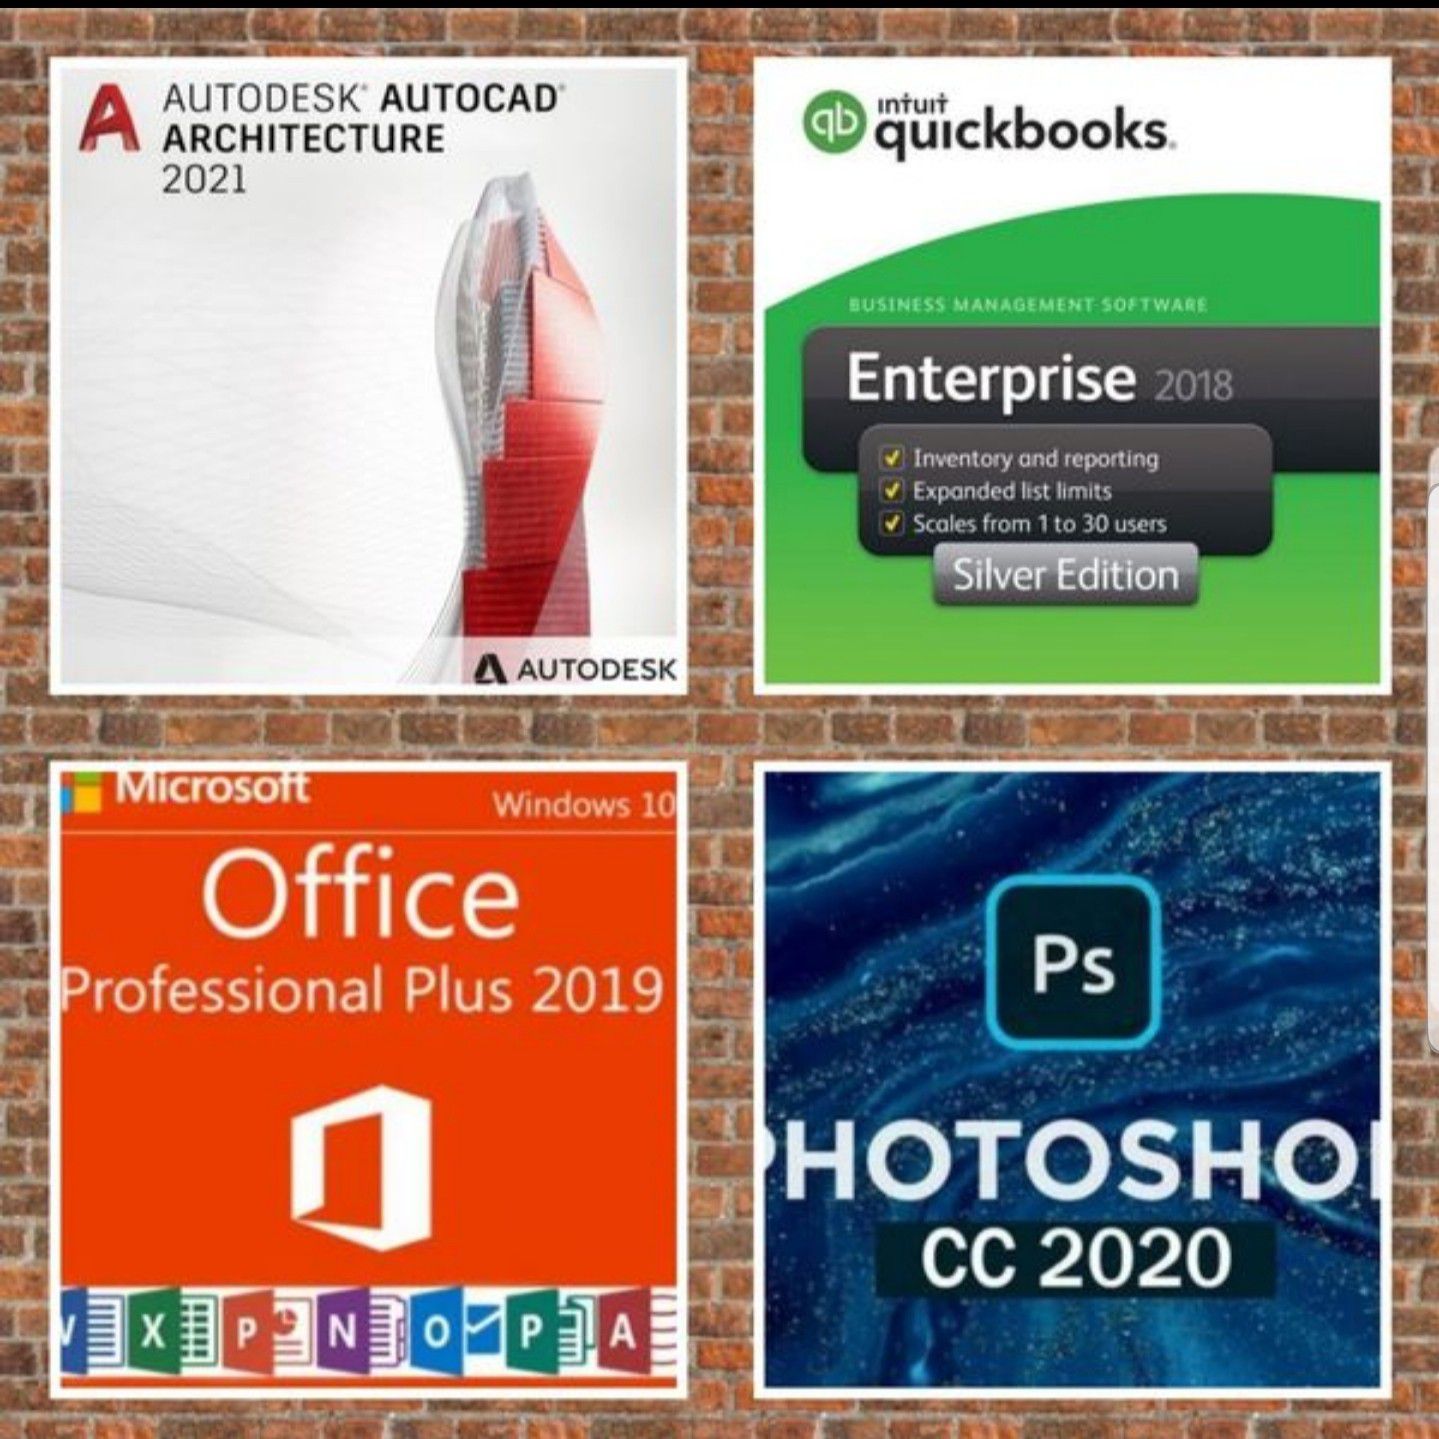 Do you need Microsoft Office Lifetime? AutoCAD 2021? Adobe Photoshop Lifetime? Fraction the cost!